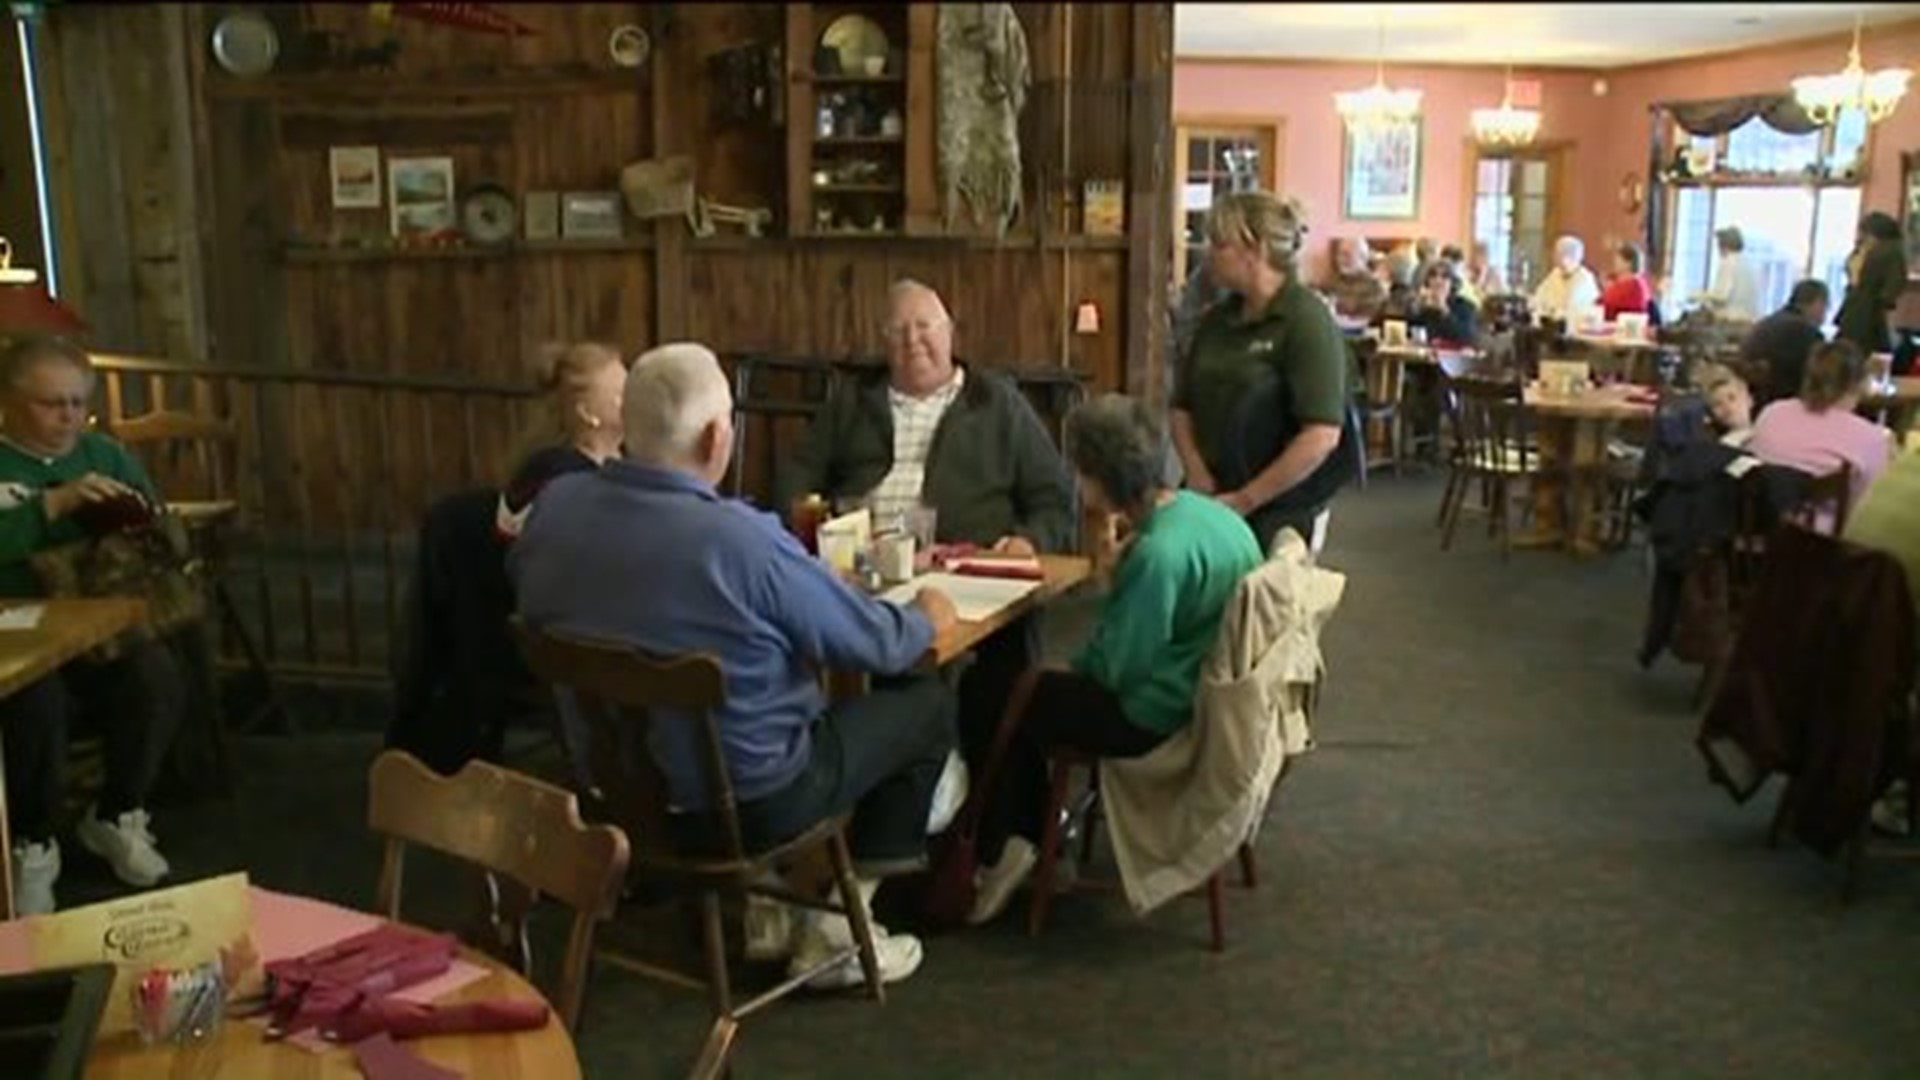 Free Meals for Vets on Veterans Day